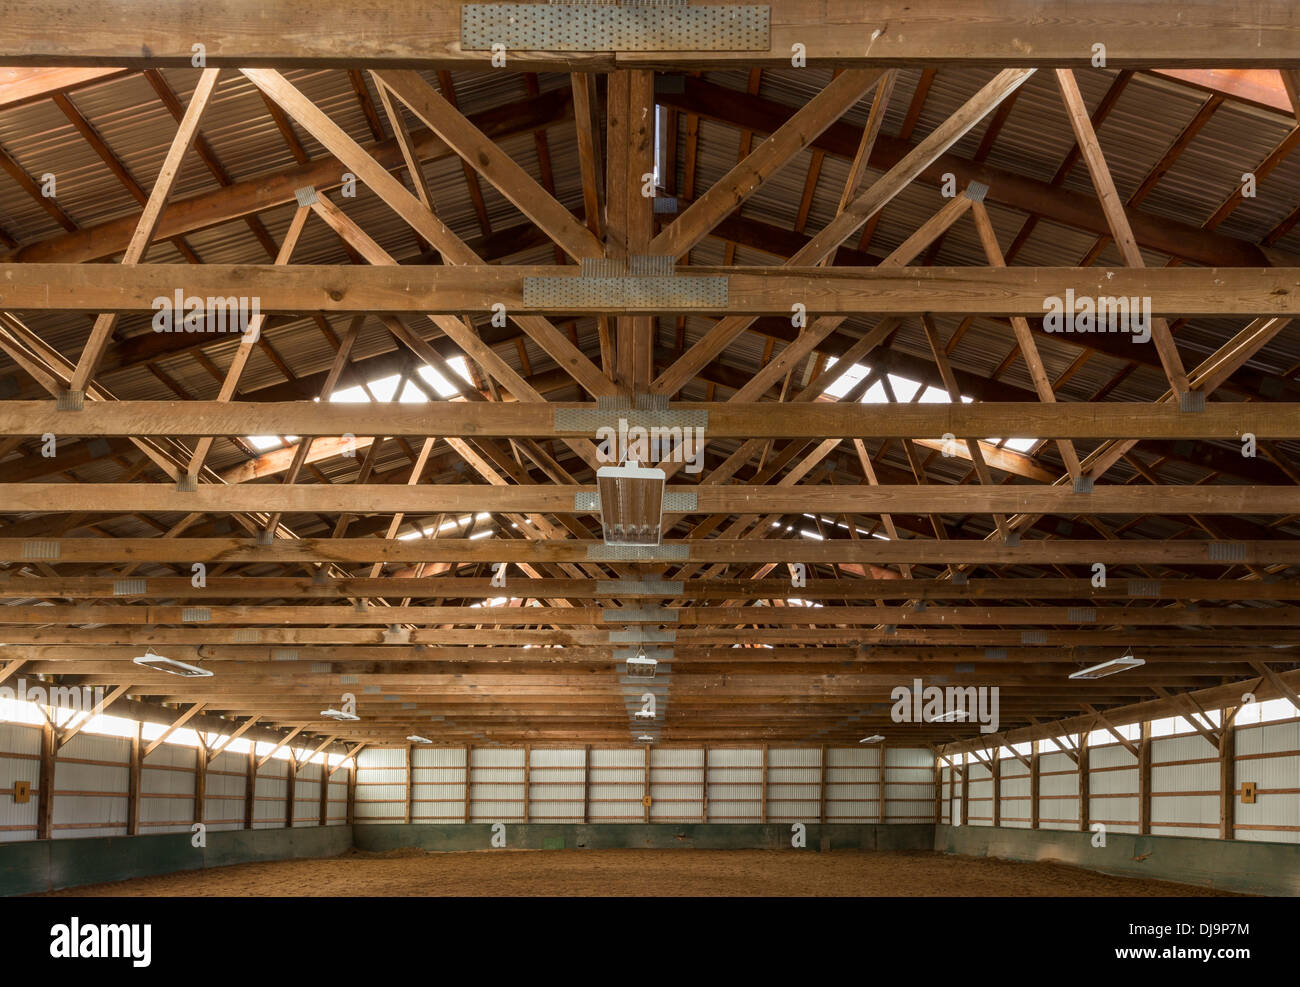 Wooden rafters in indoor horse riding ring Stock Photo